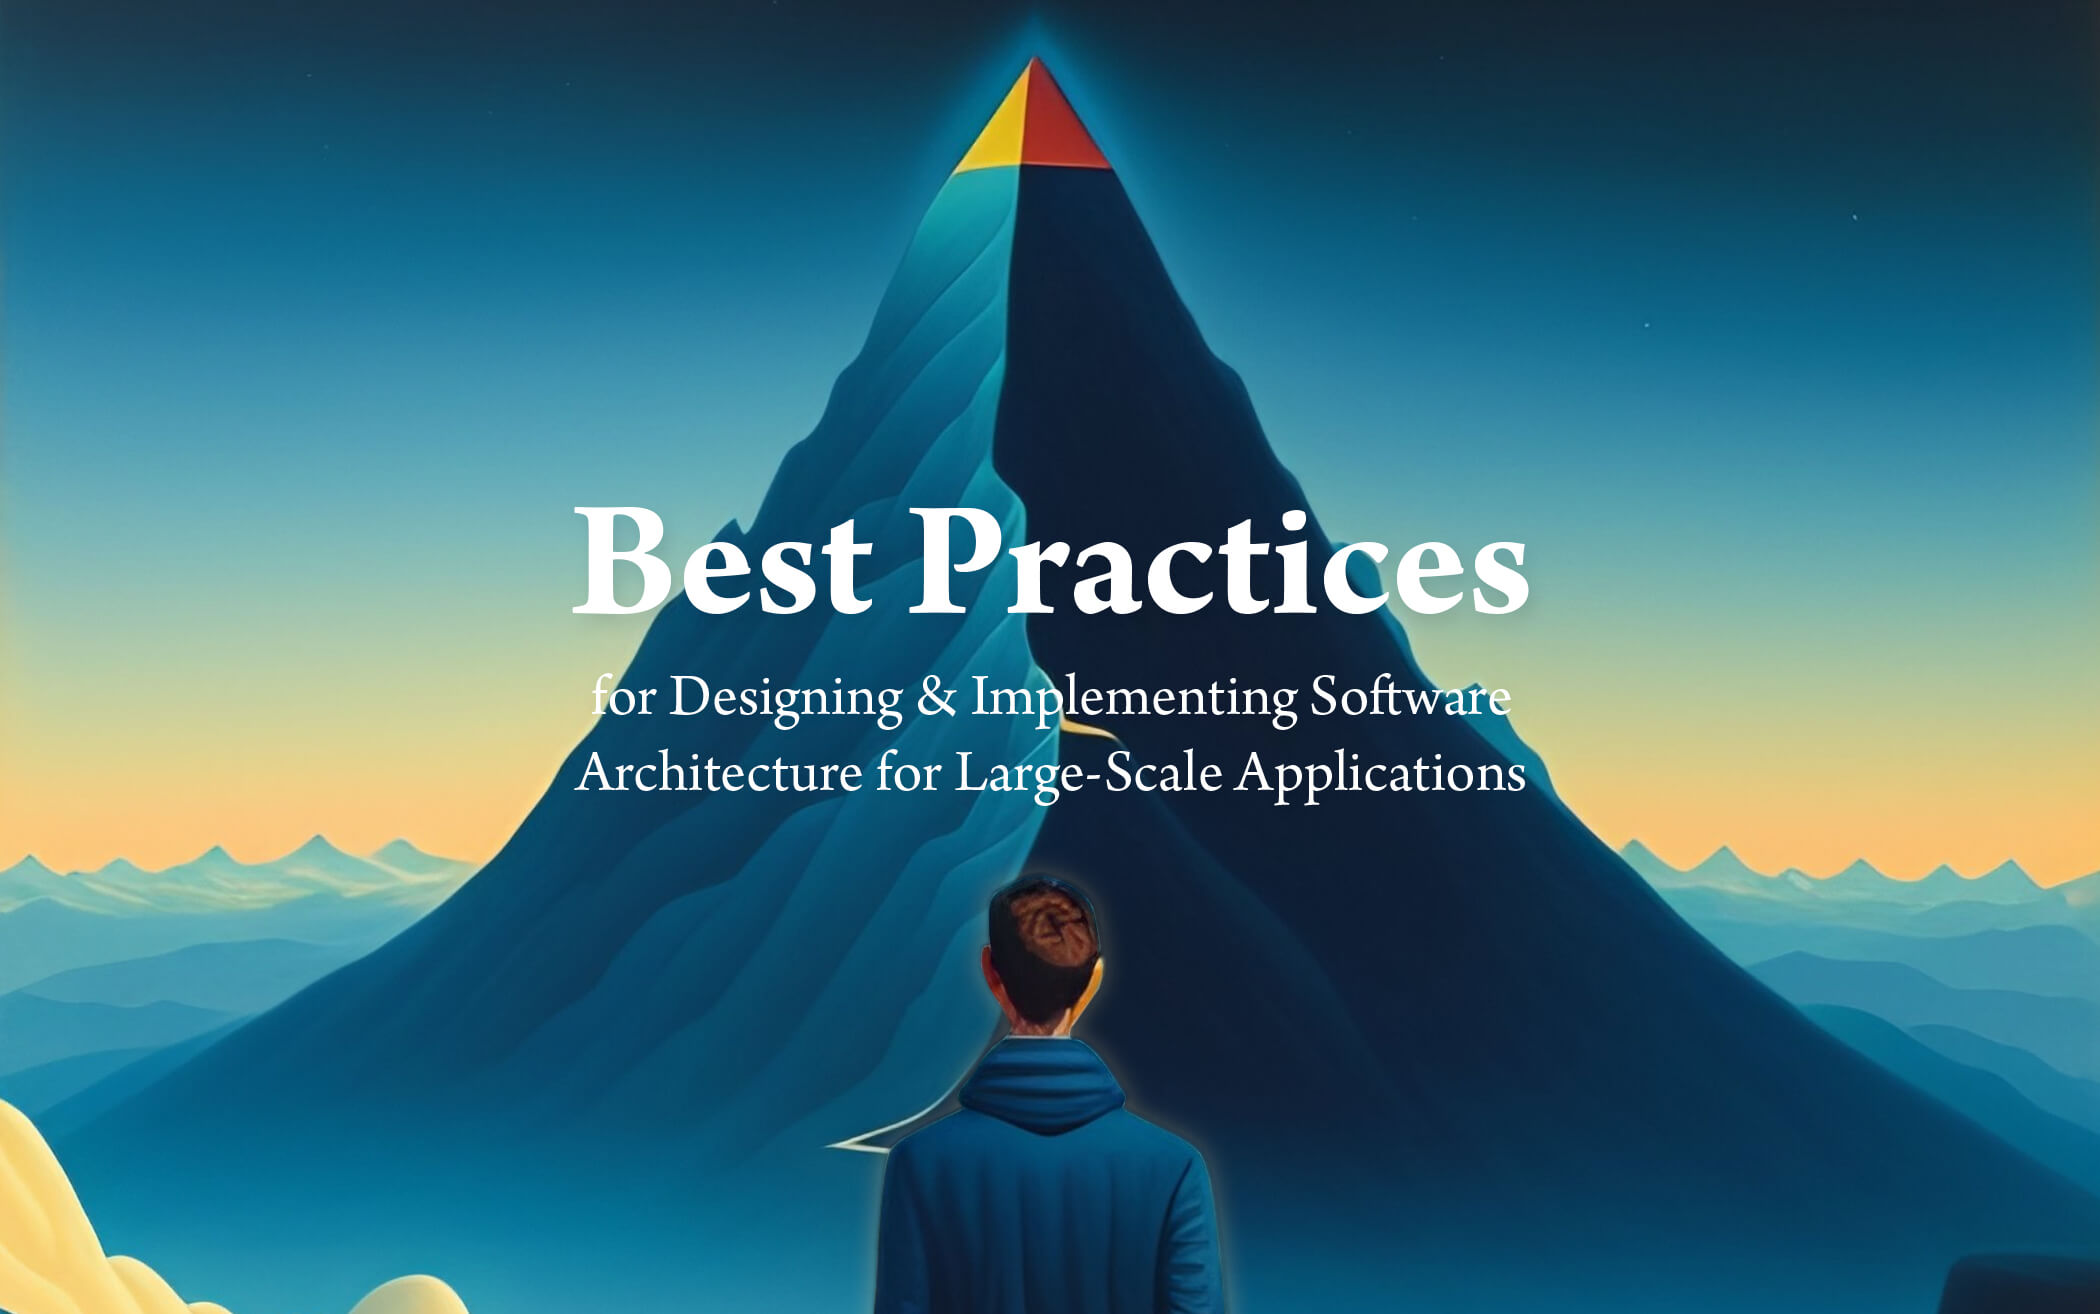 Best Practices for Designing & Implementing Software Architecture for Large-Scale Applications